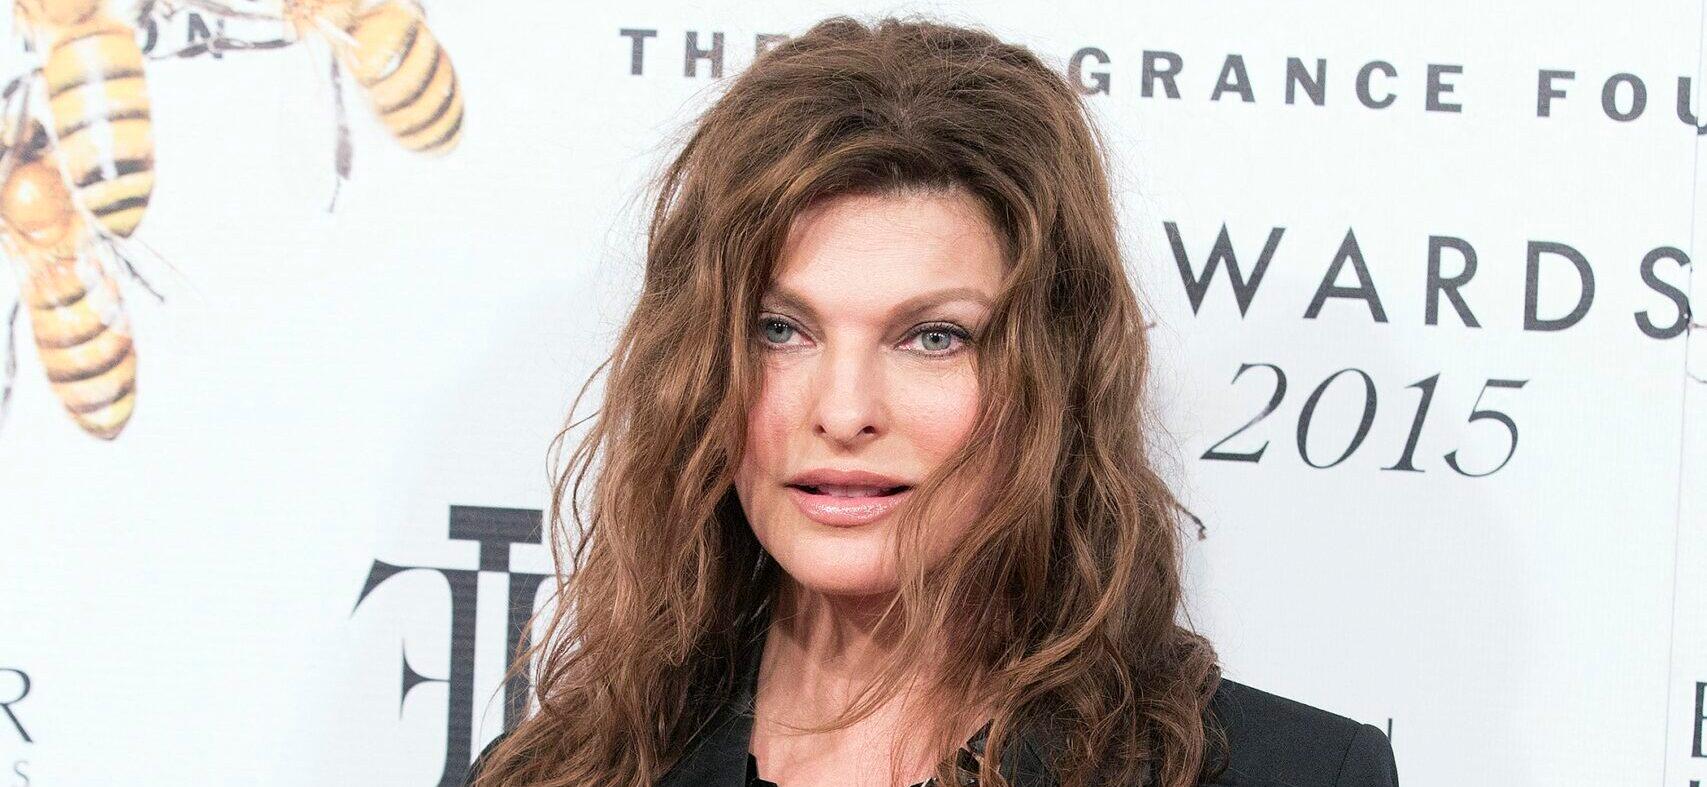 Linda Evangelista Opens Up About Breast Cancer Battle And Her Double Mastectomy